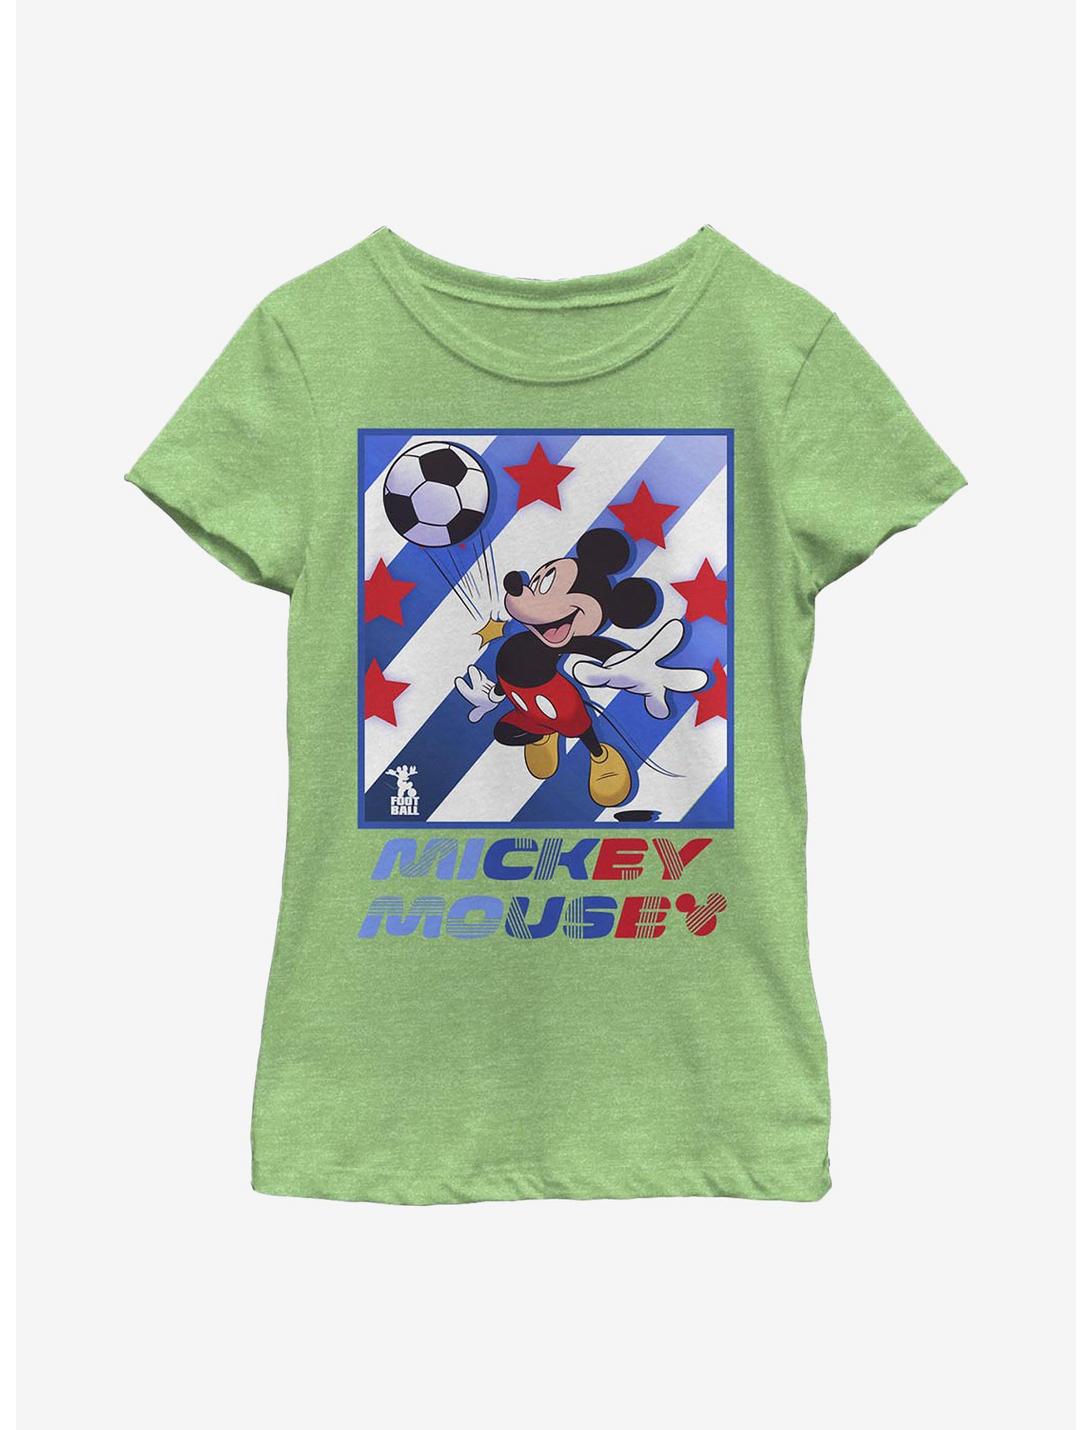 Disney Mickey Mouse Football Star Youth Girls T-Shirt, GRN APPLE, hi-res